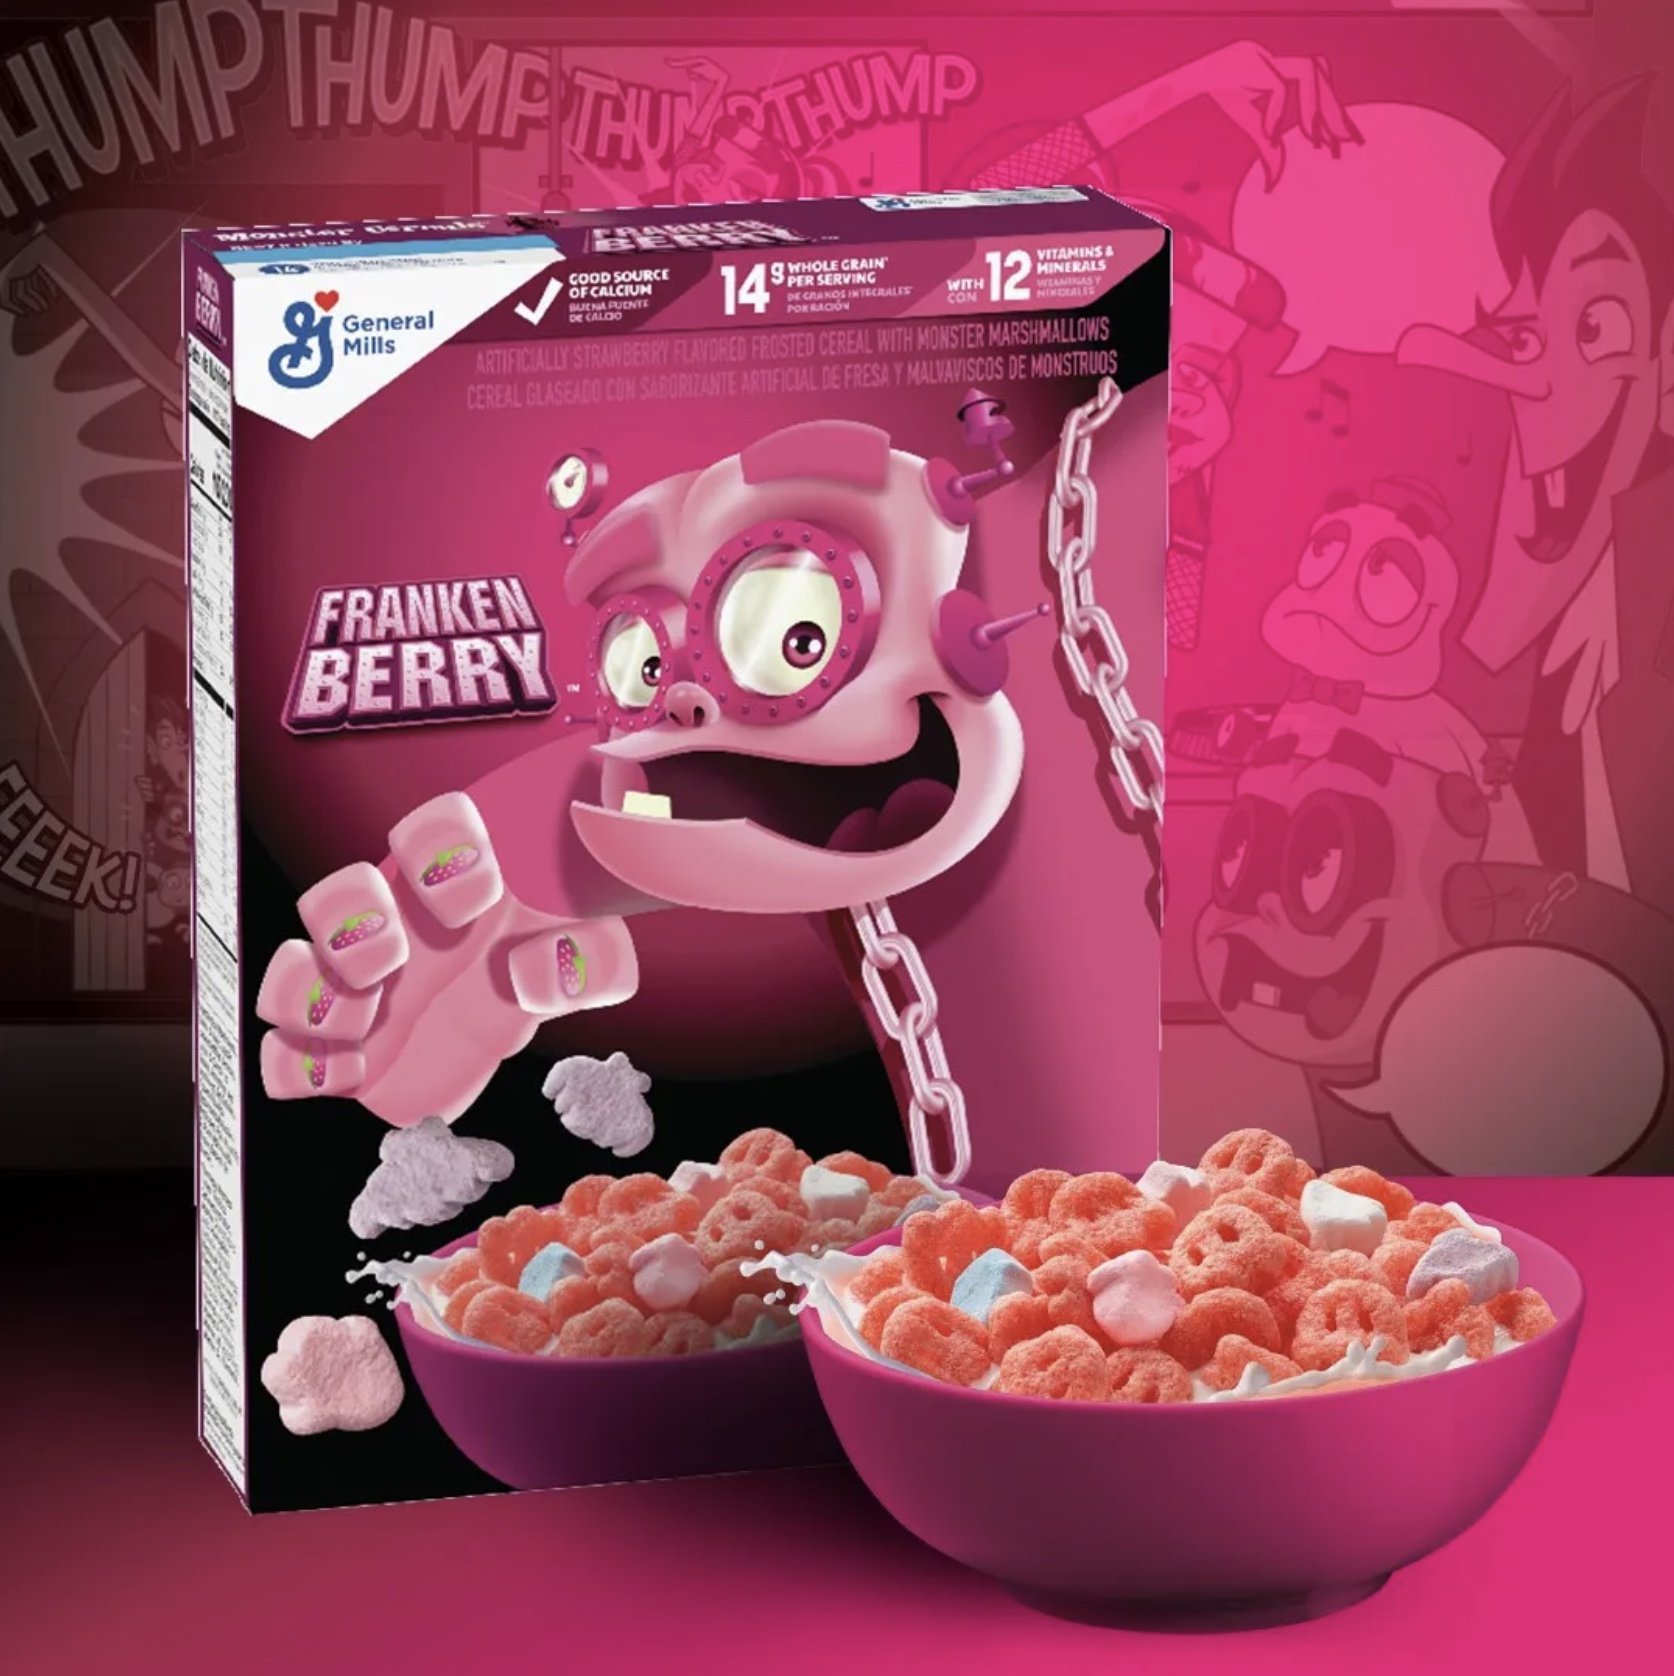 General Mills Announces The First New Monster Cereal in 35 Years with ...